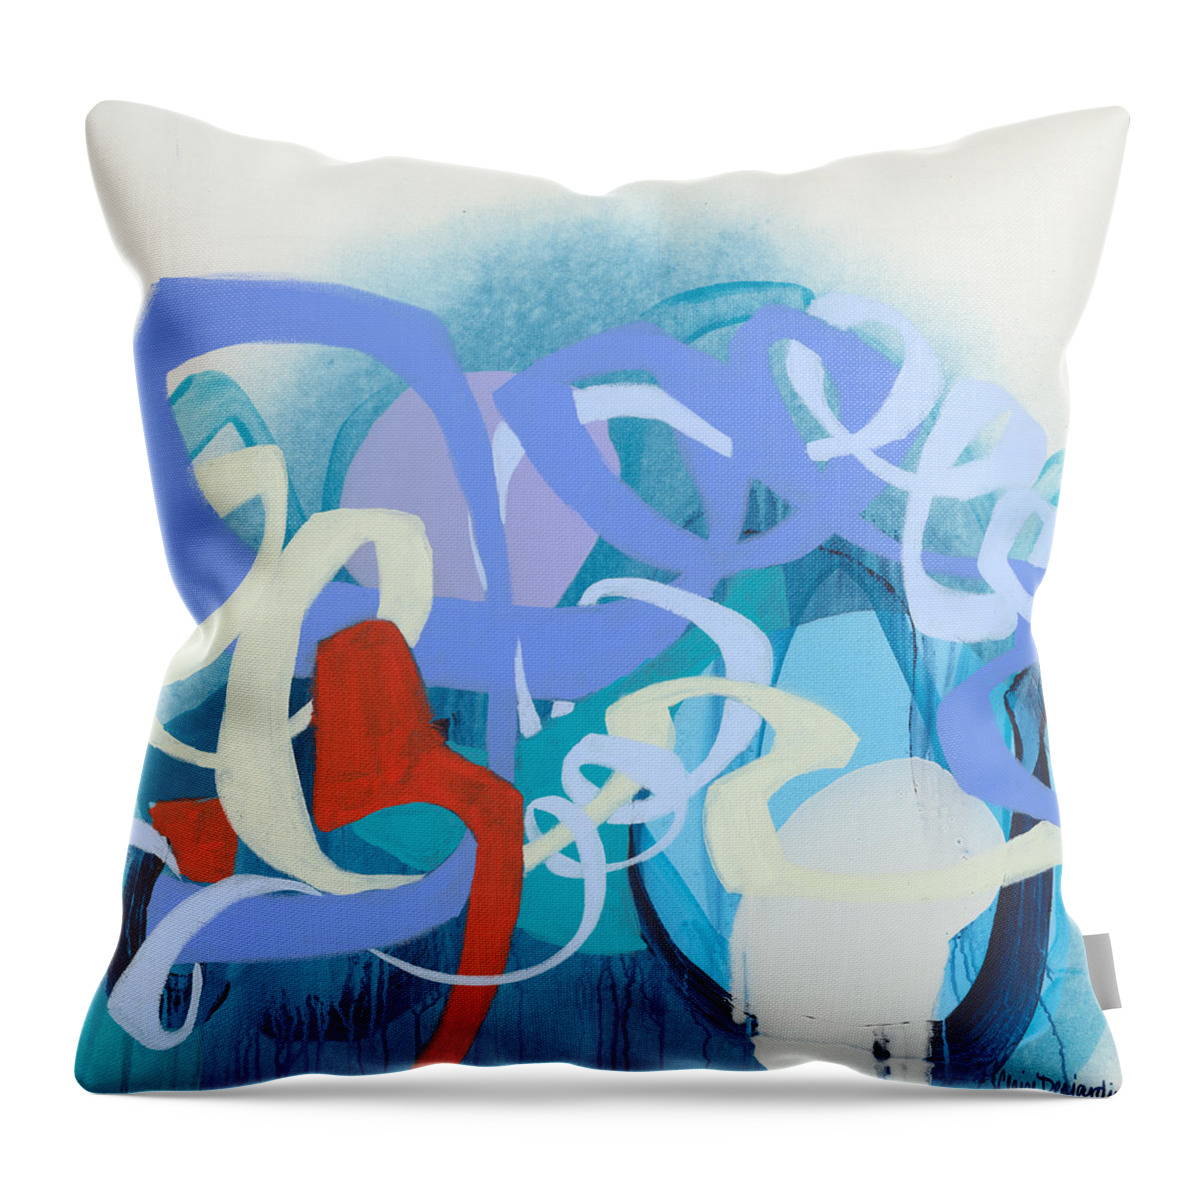 Abstract Throw Pillow featuring the painting The Things We Knew by Claire Desjardins